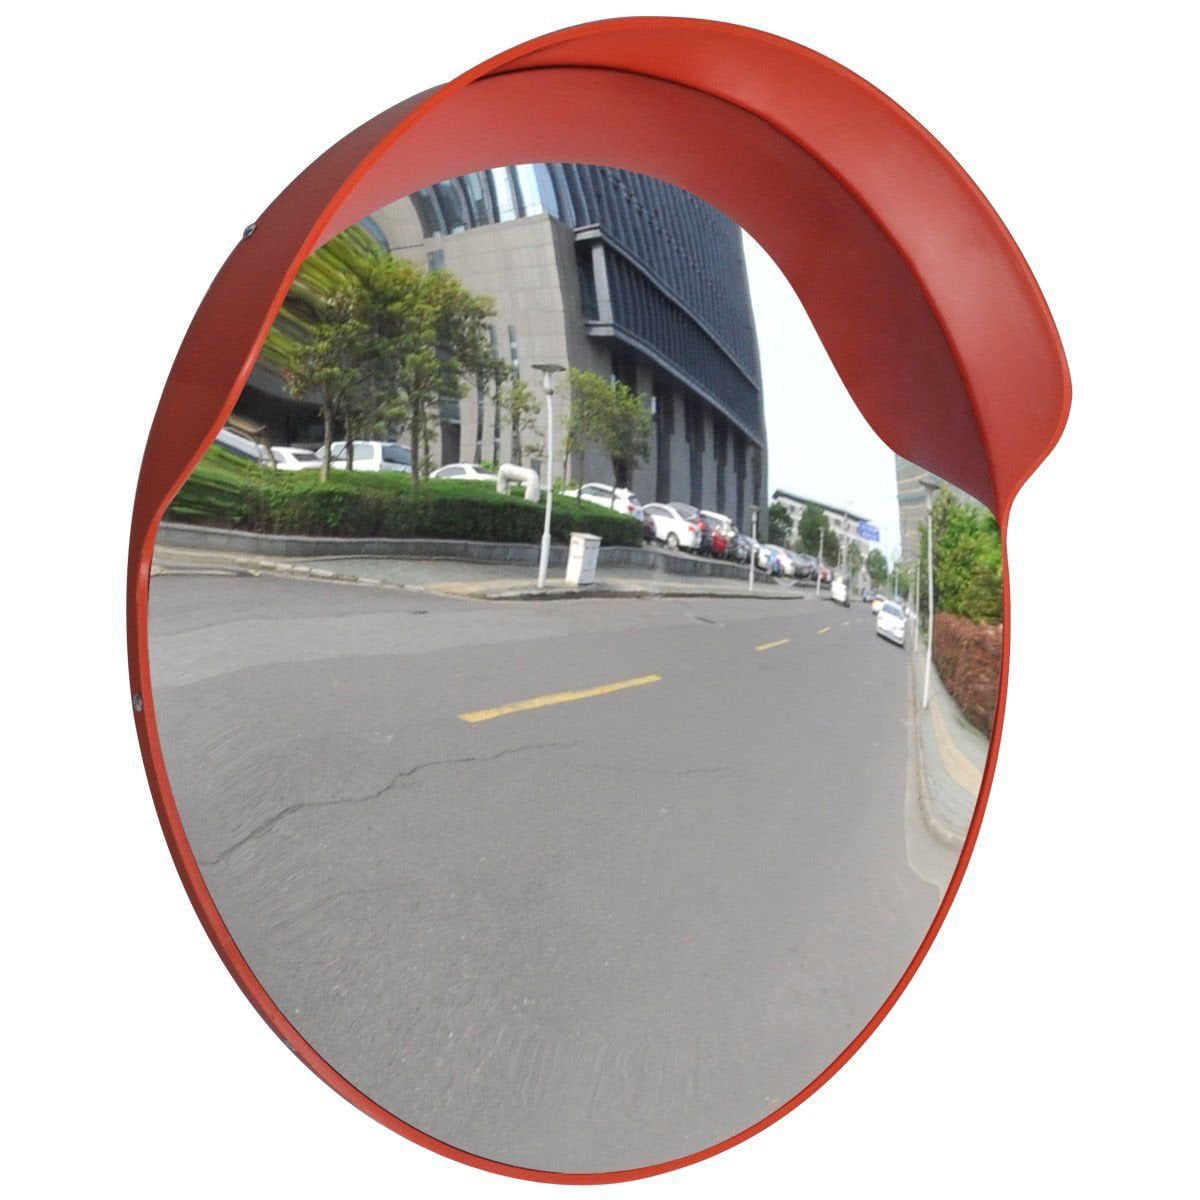 12 Inch Outdoor Wide Angle Traffic Driveway Convex Mirror Blind Spot Mirror 